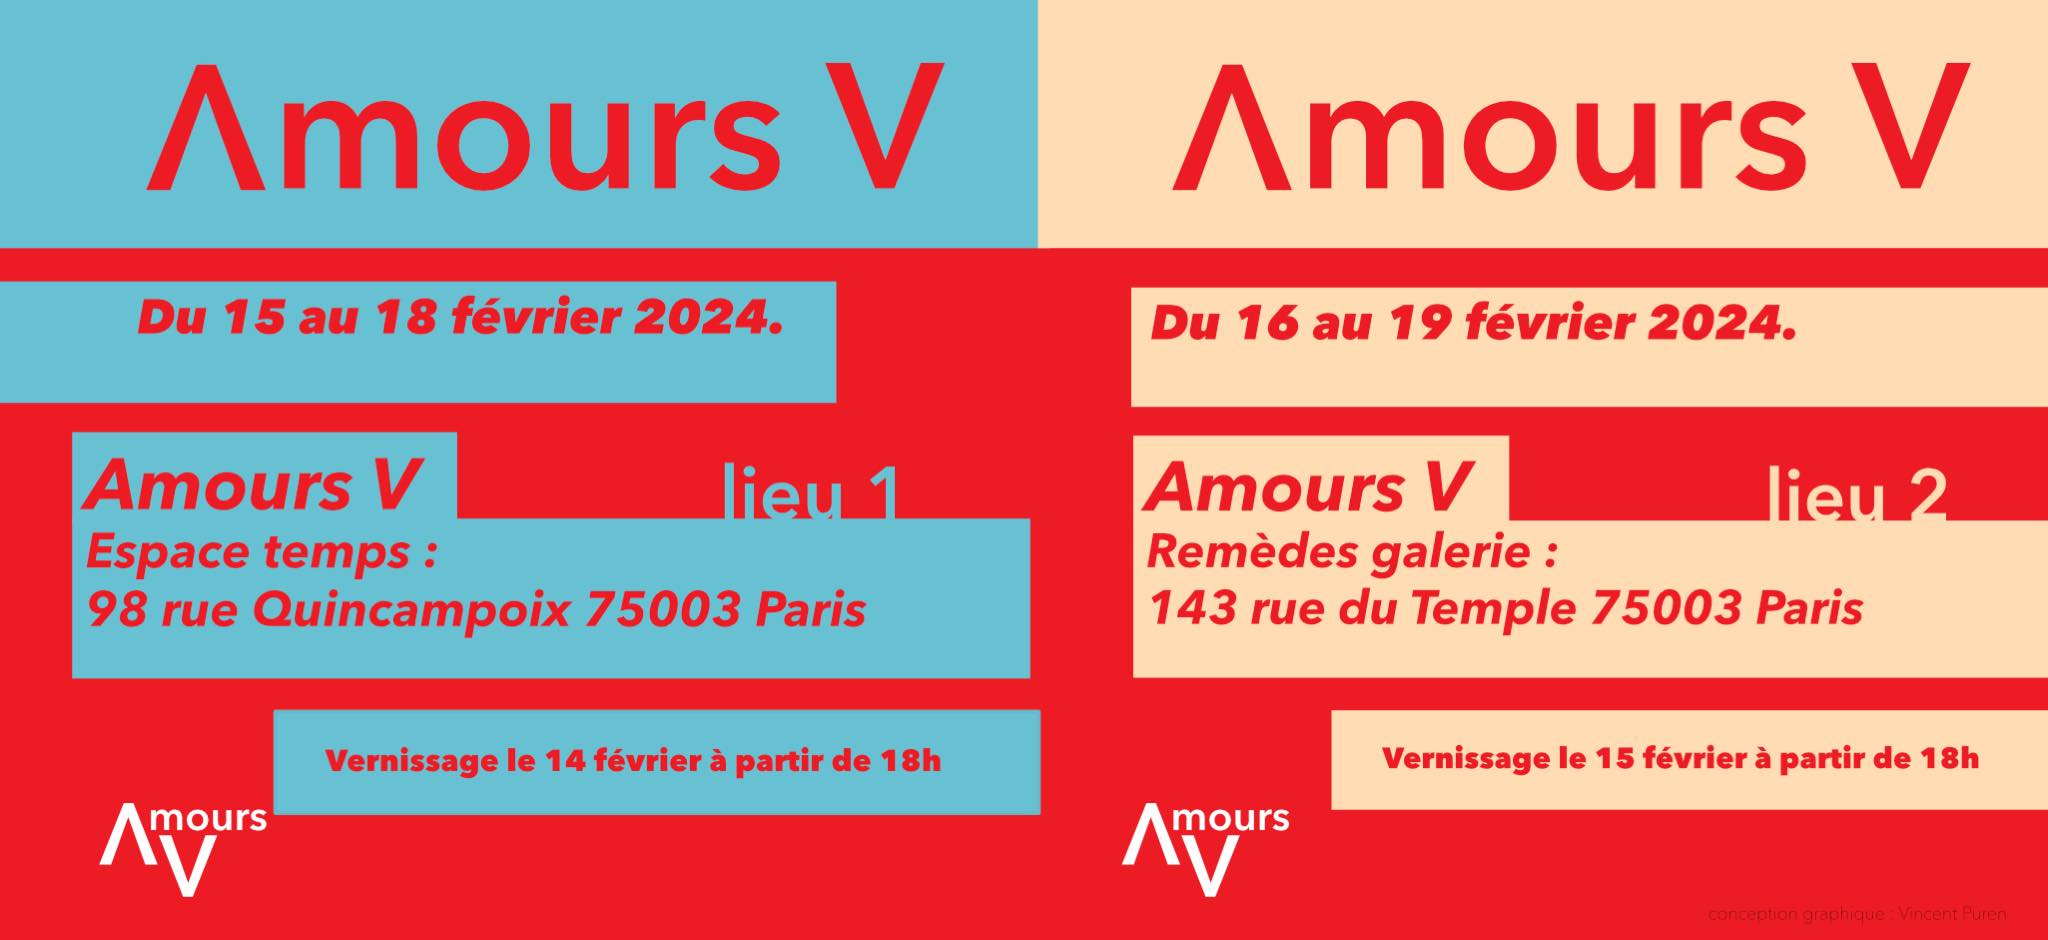 Exposition : Amours V